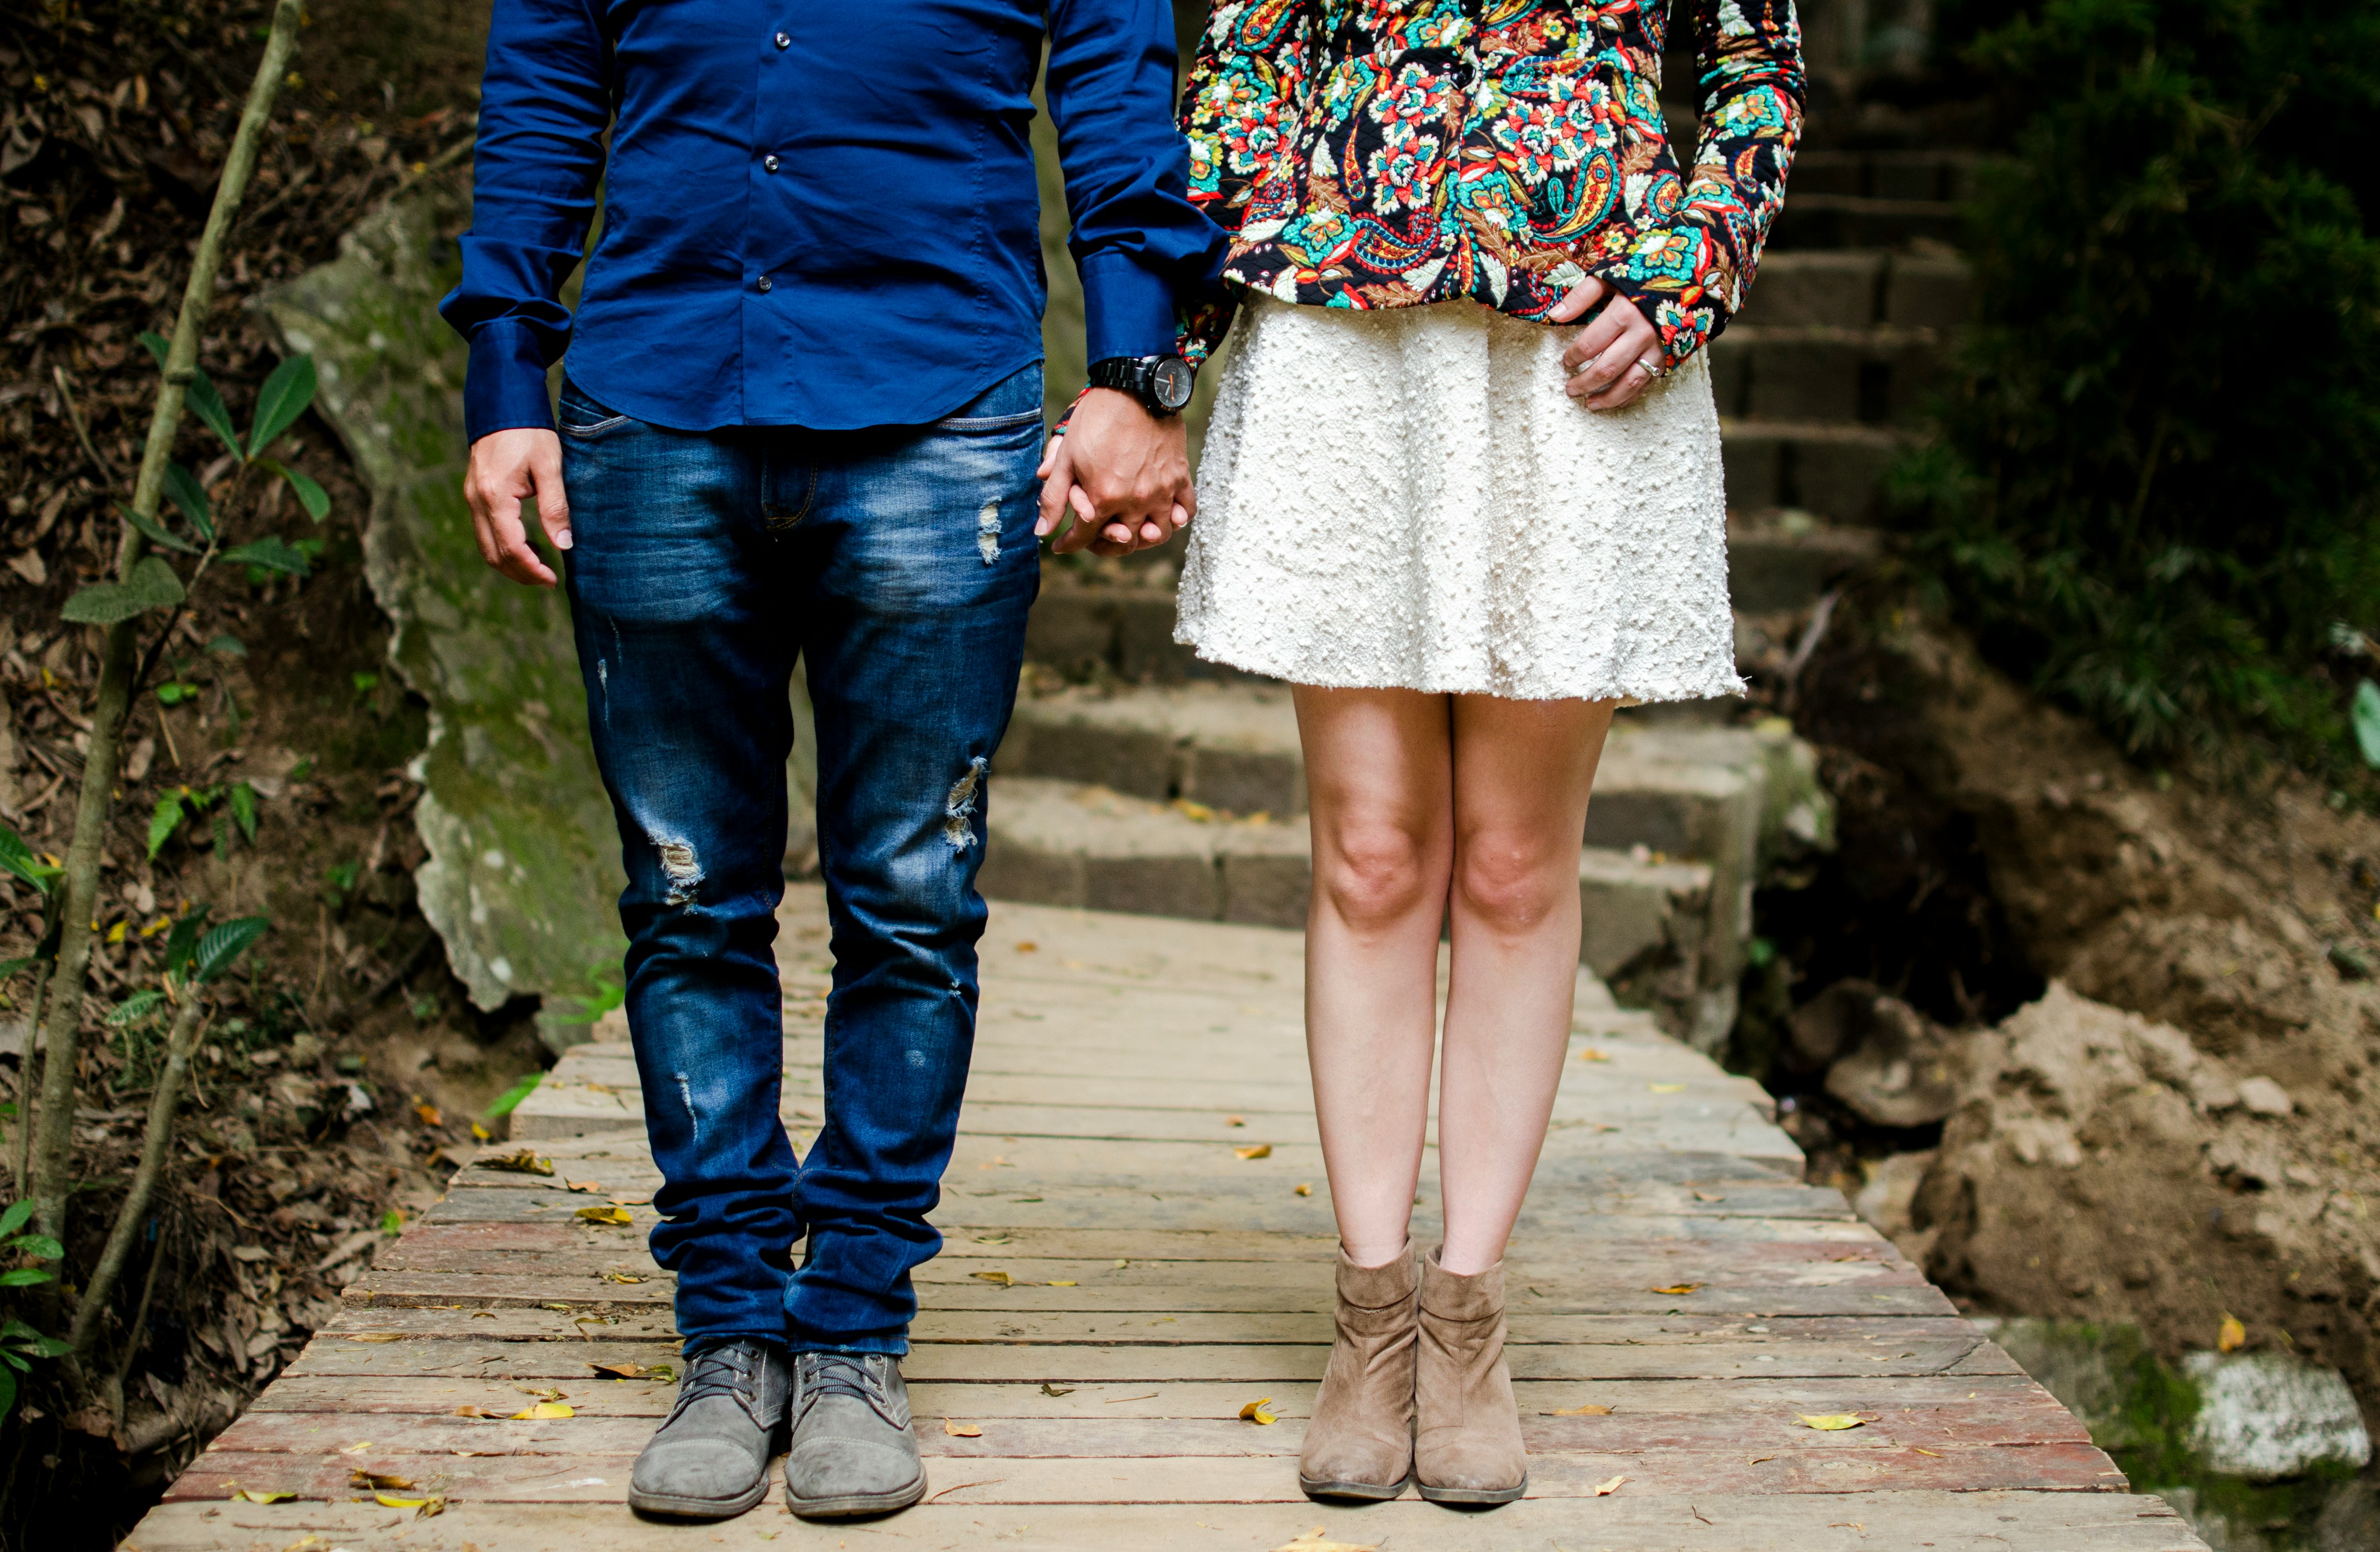 man and woman holding hands during daytime